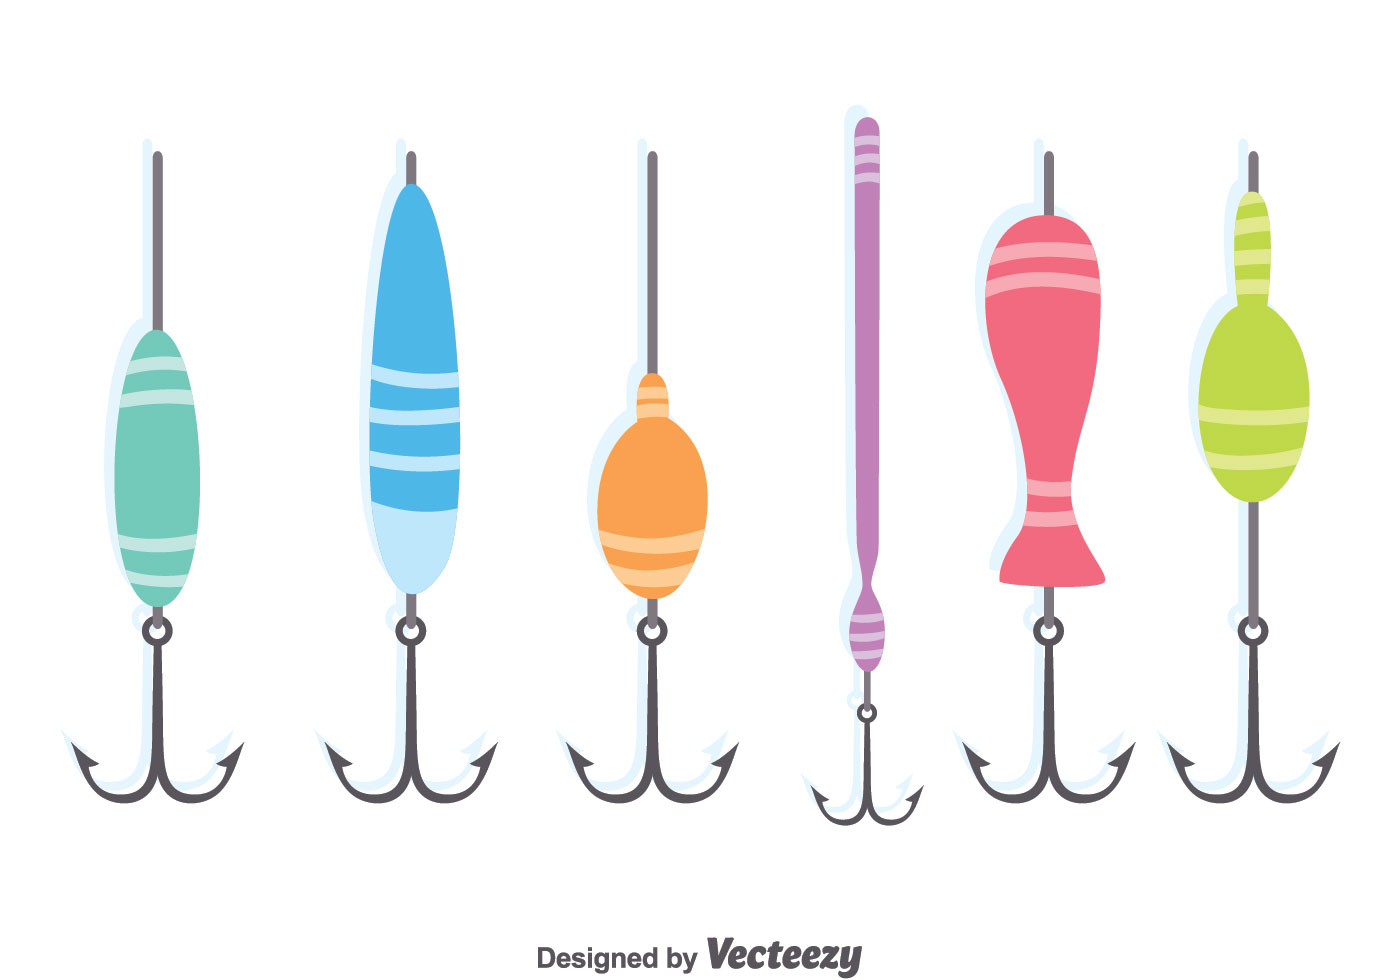 Download Colorful Fishing Lure Vector Set - Download Free Vectors ...